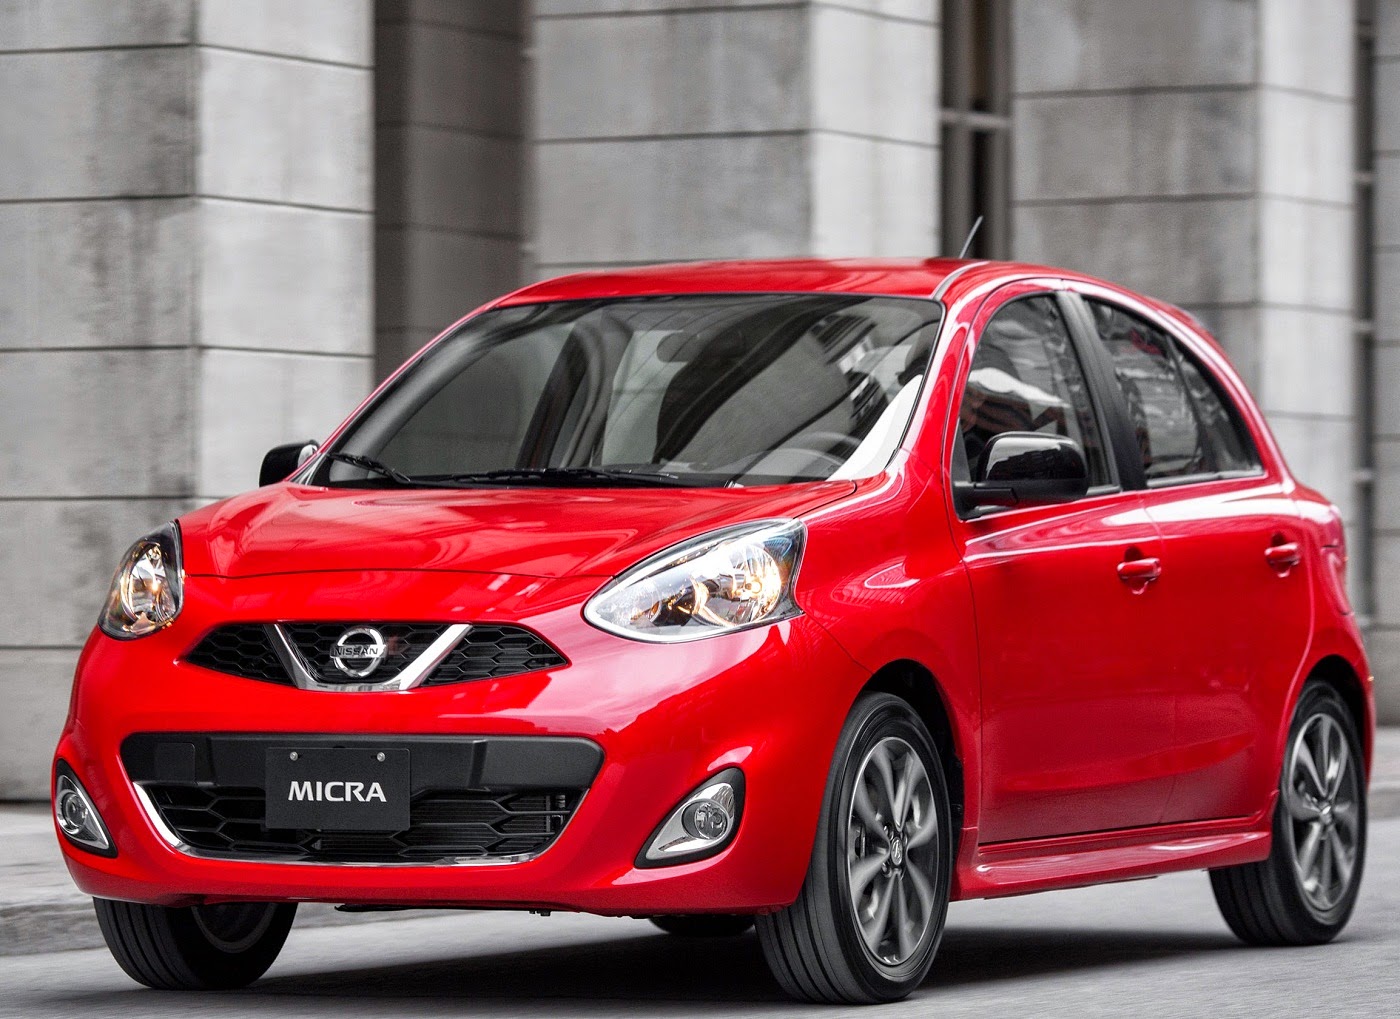 Cheapest new nissan micra cars #4